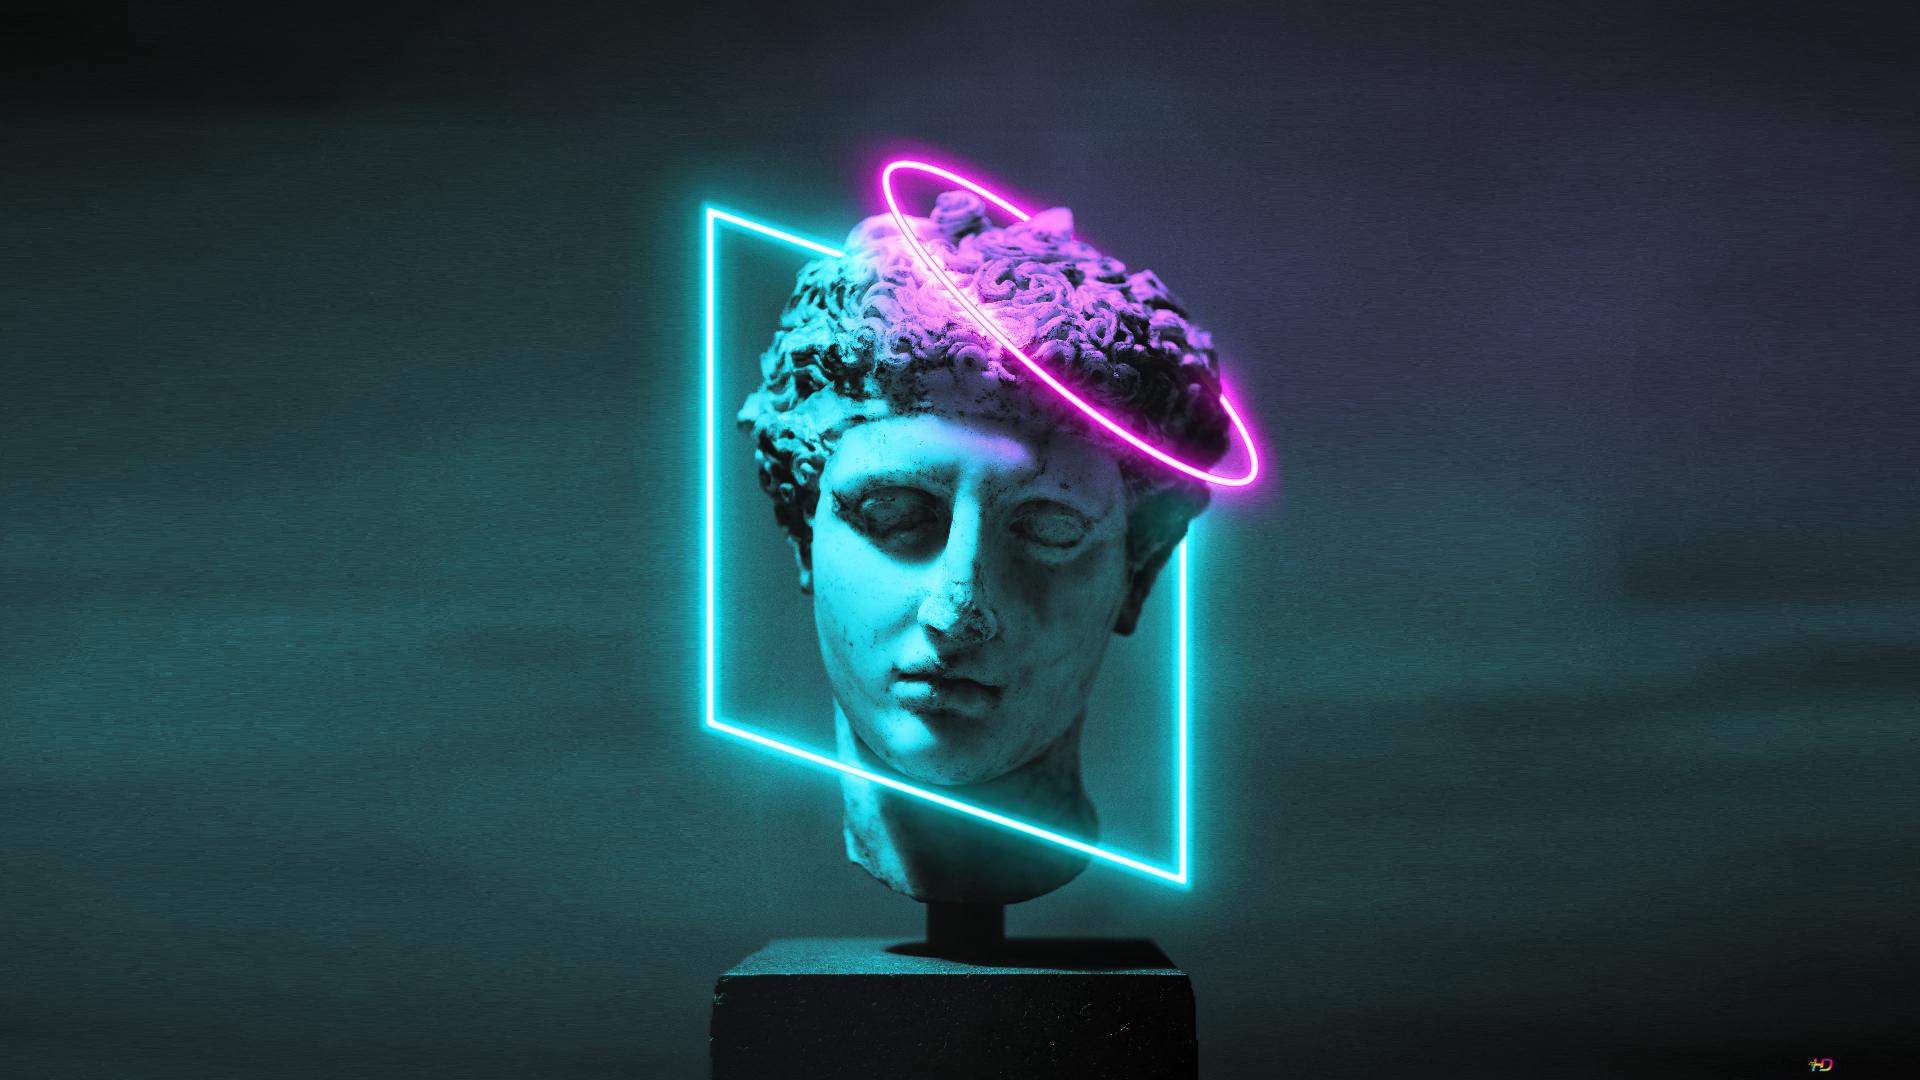 A neon light with an image of the statue - Greek statue